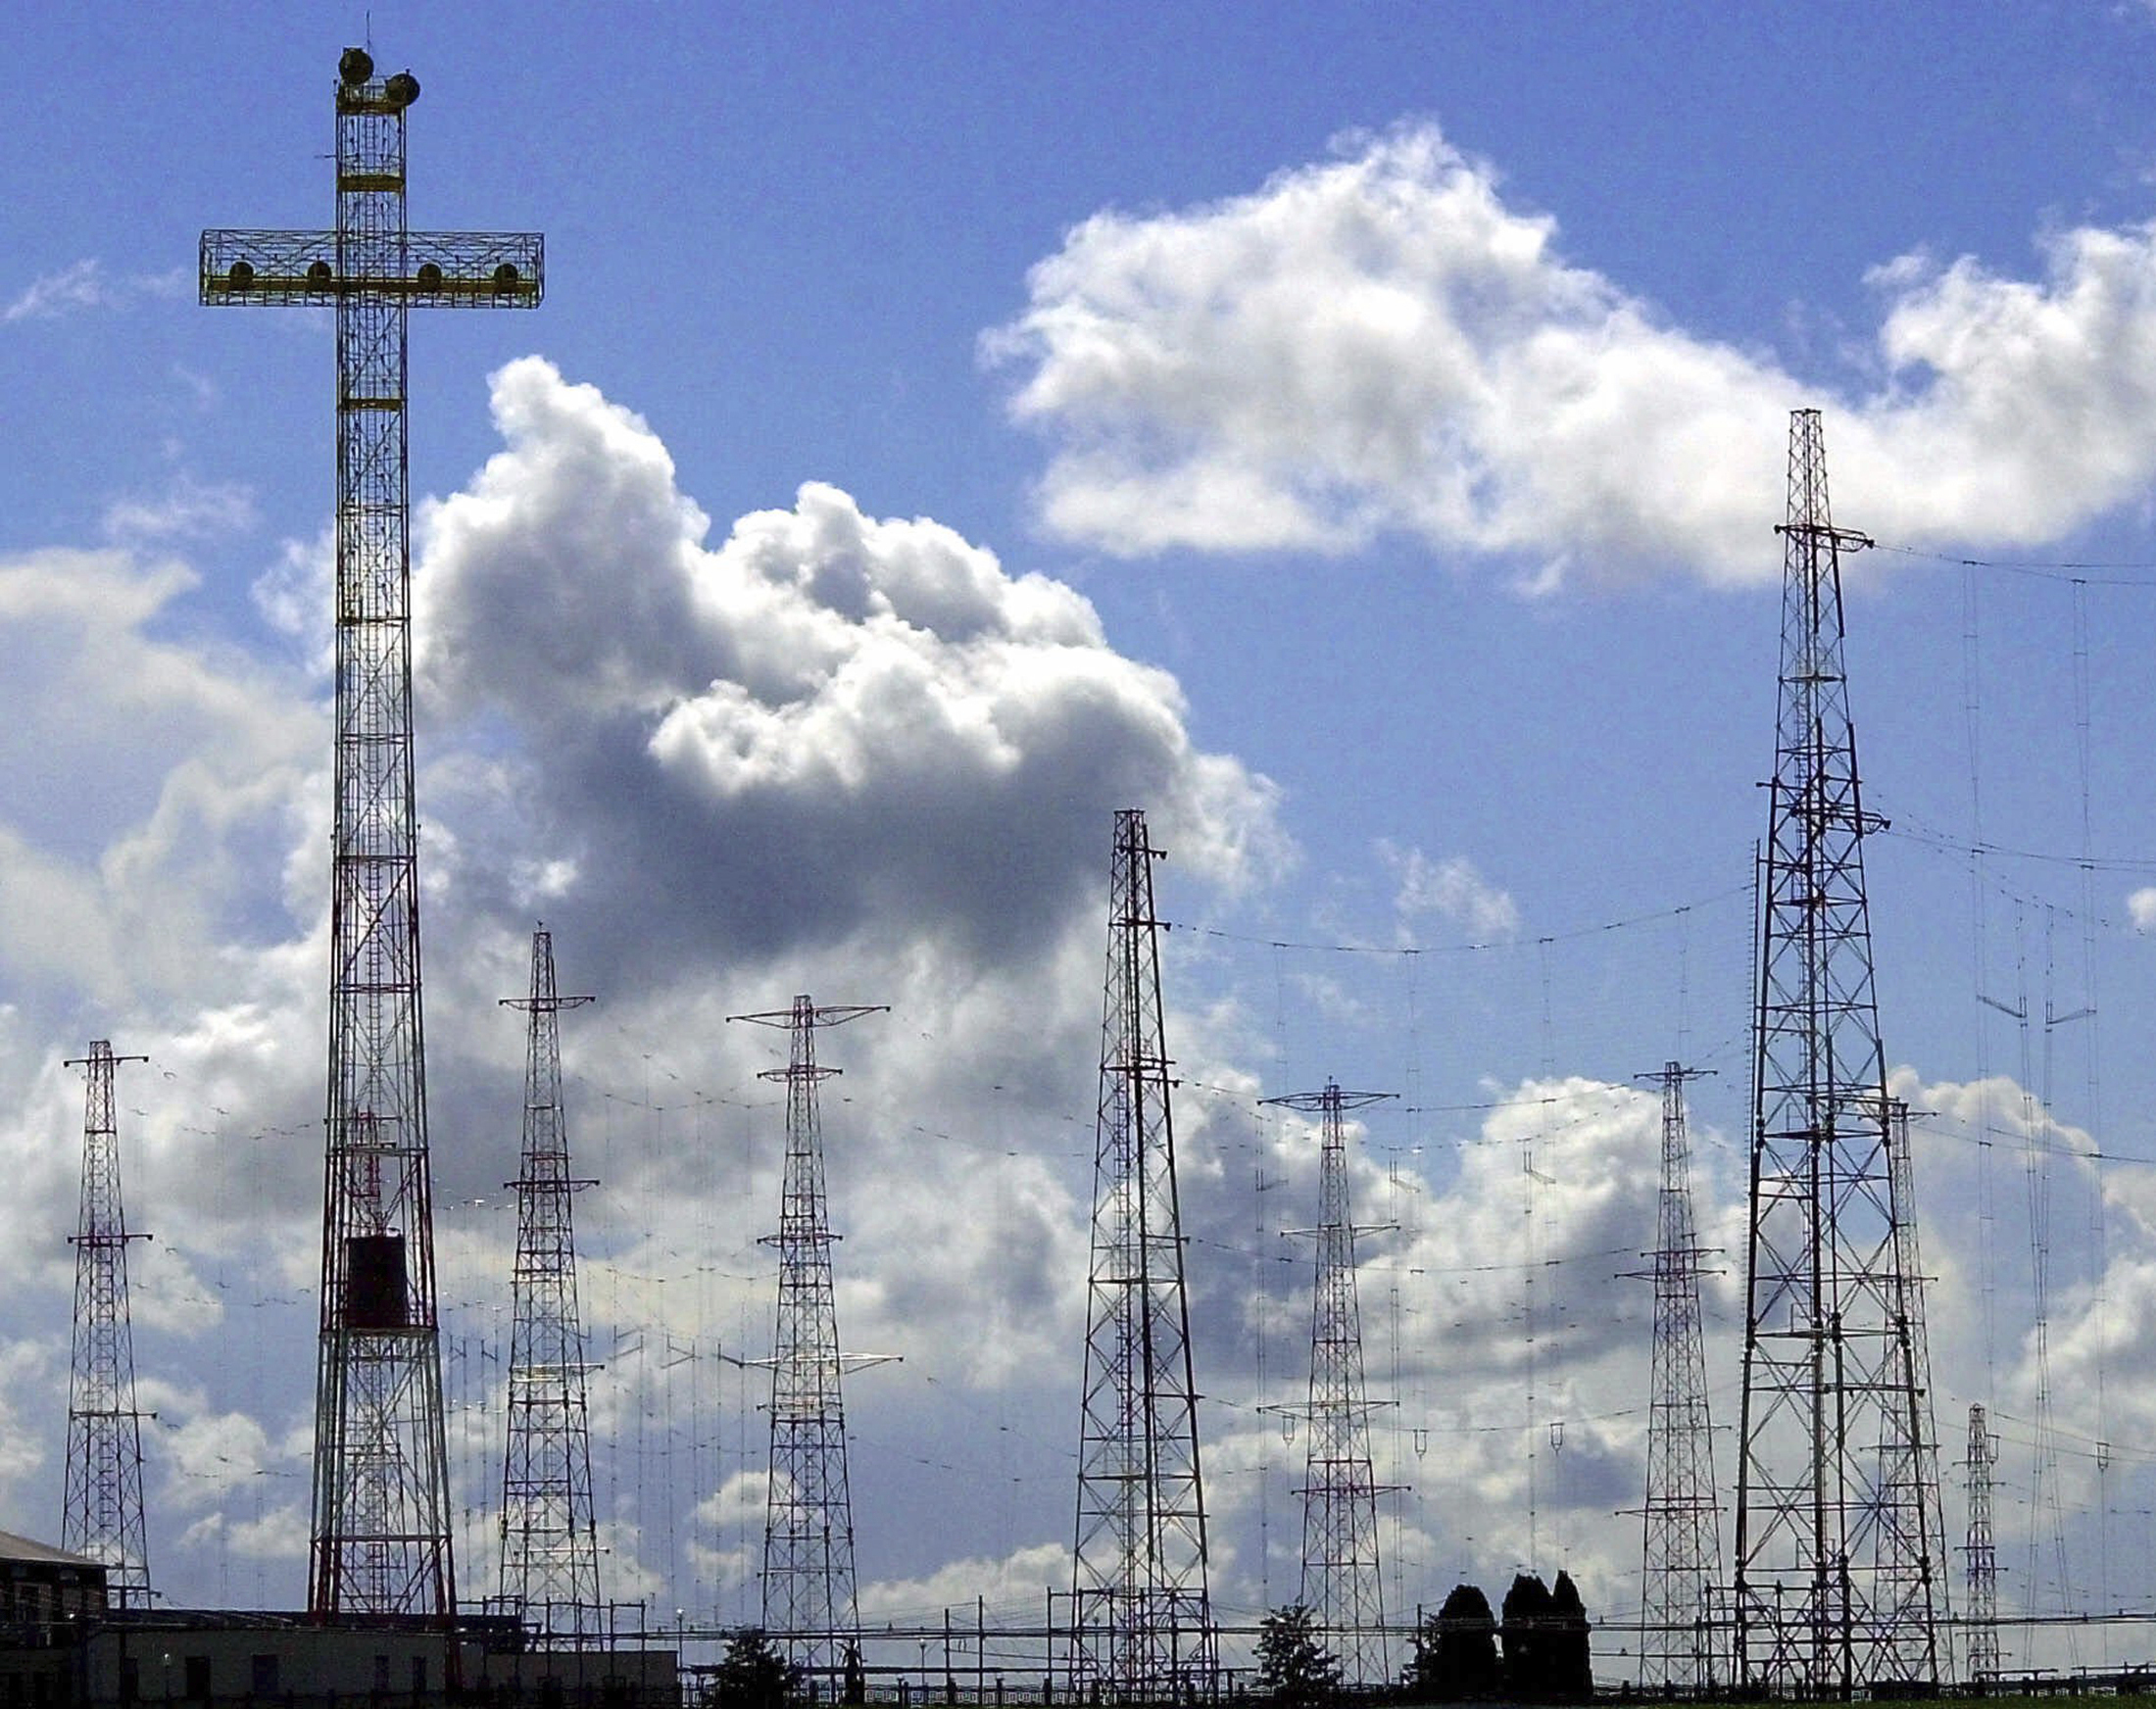 FILE - A view of the antennas of the Vatican Radio, which beams the Pope's words around the world, is seen in Santa Maria di Galeria, on the outskirts of Rome, on April 11, 2001. Pope Francis decreed Wednesday that an area of northern Rome, long the source of controversy because of electromagnetic waves emitted by Vatican Radio towers there, will now house solar panels to fuel Vatican City. (AP Photo/ Gregorio Borgia, File)